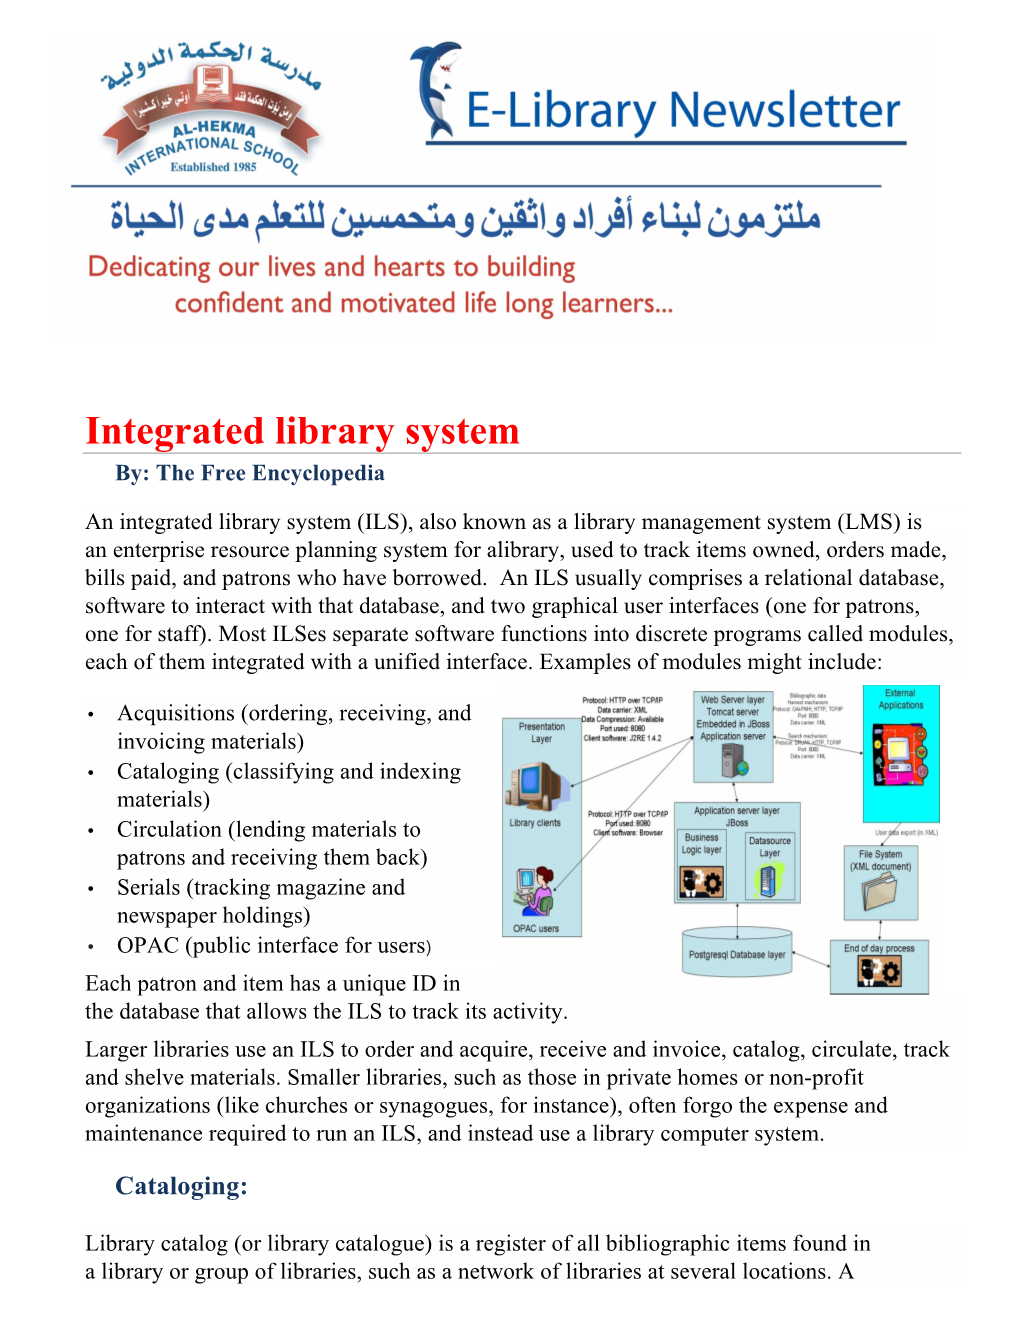 Integrated Library System By: the Free Encyclopedia